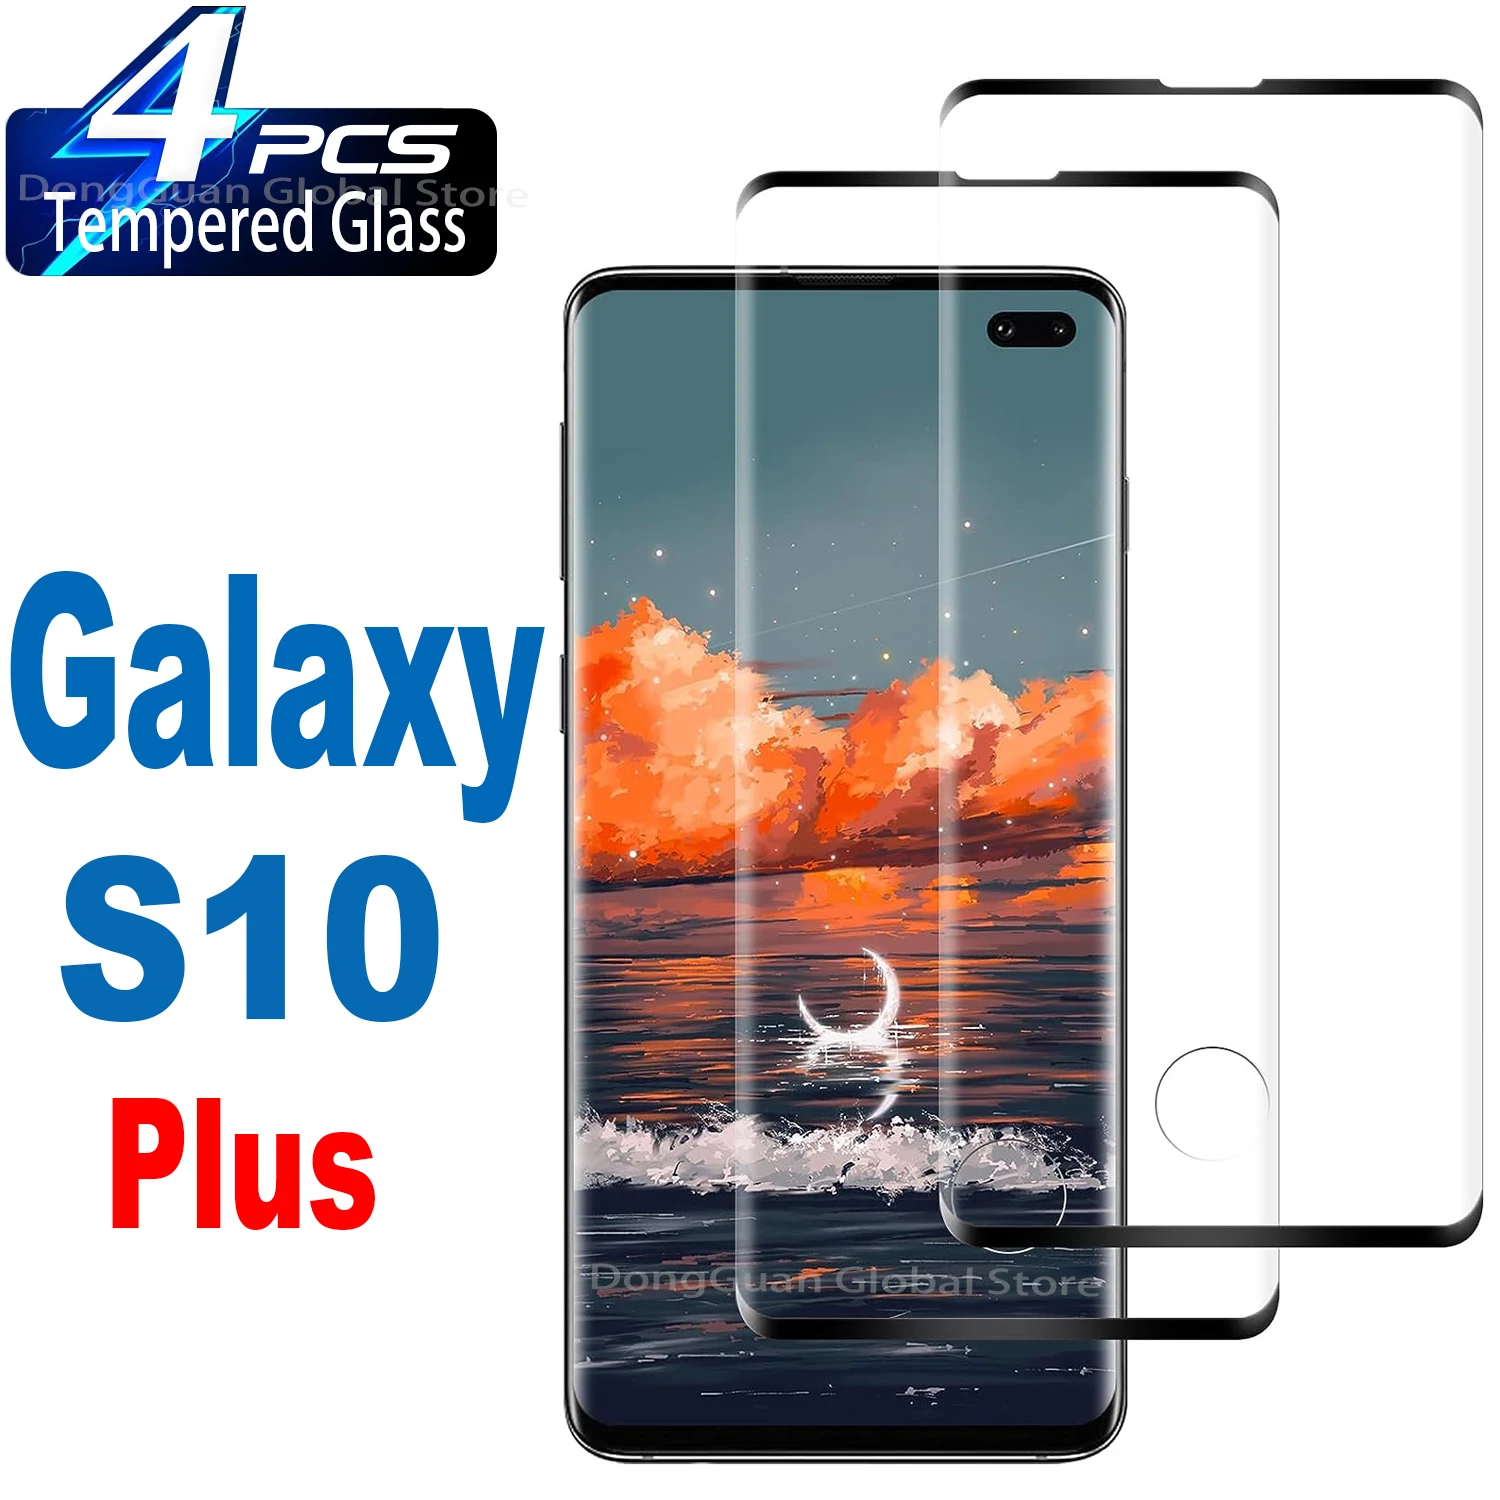 2/4Pcs Tempered Glass For Samsung Galaxy S10 Plus S10+ S20 S20+ Plus Screen Protector Glass защитная пленка для samsung galaxy s20 plus s20 s10 s10 e s10 plus s9 s9 plus s8 plus